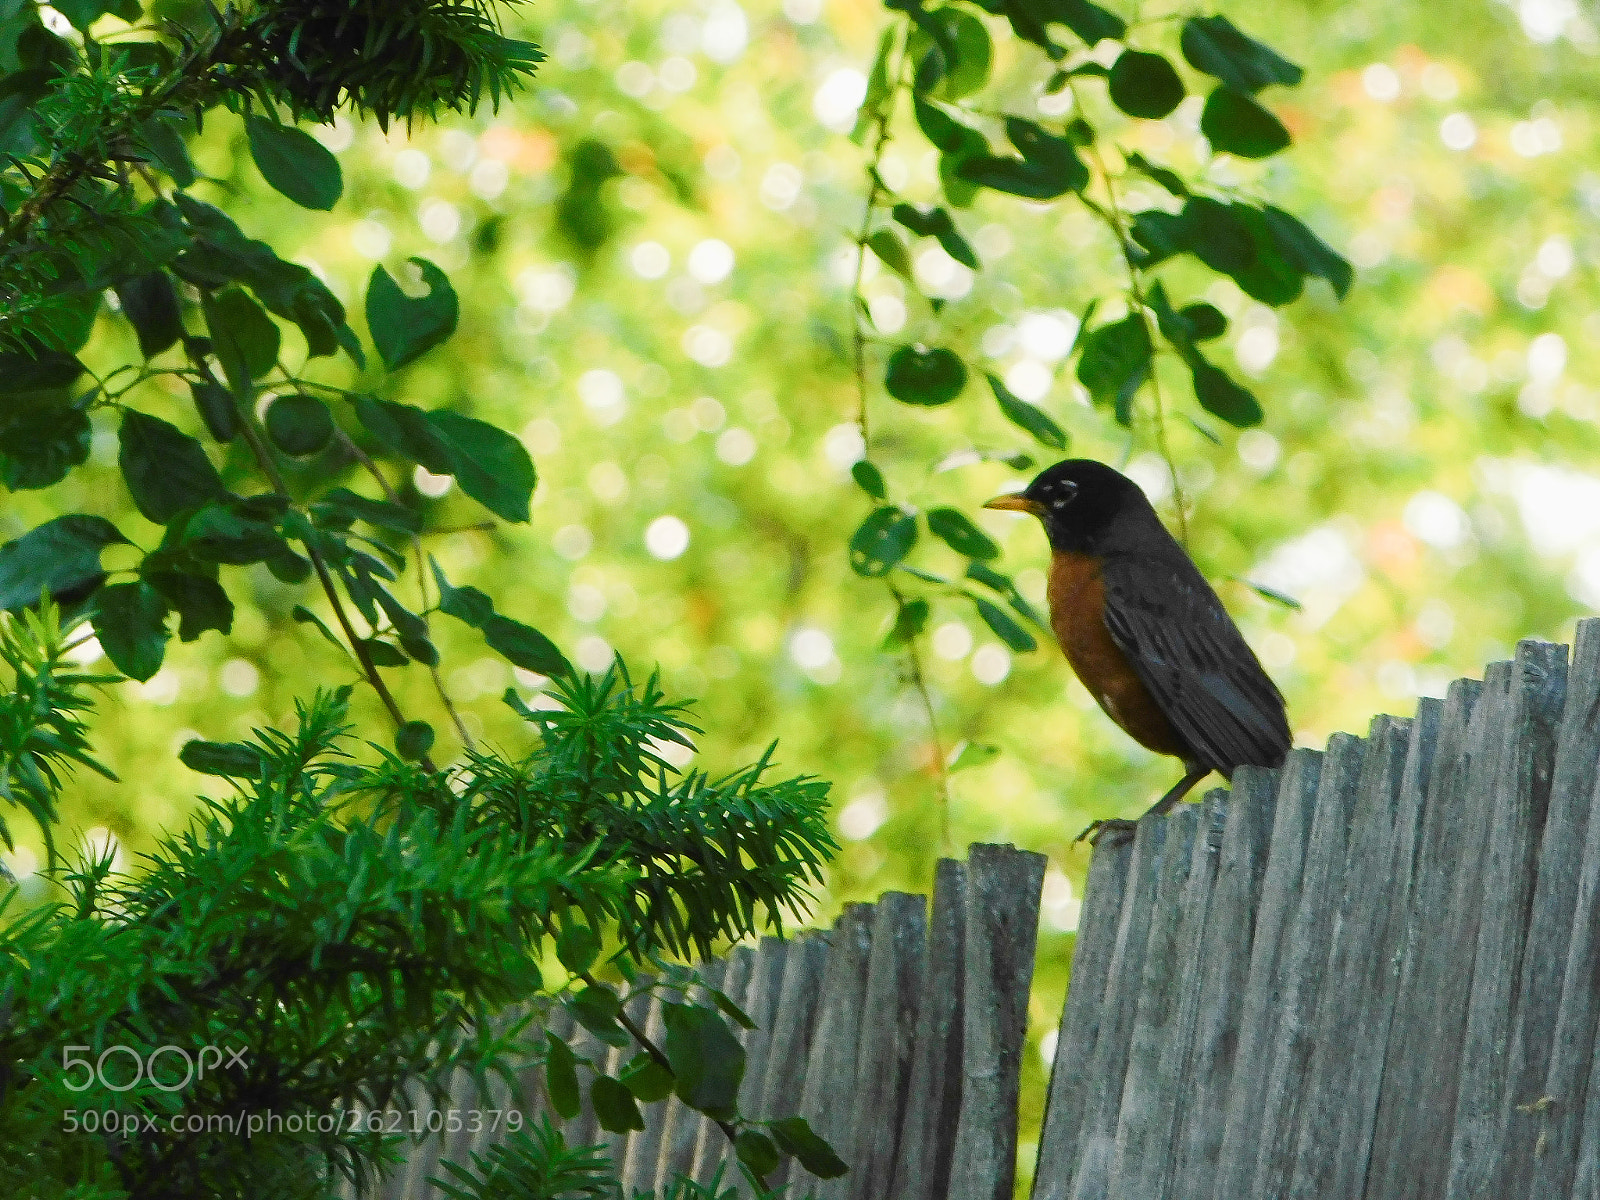 Nikon Coolpix B500 sample photo. Robin perched on fence photography